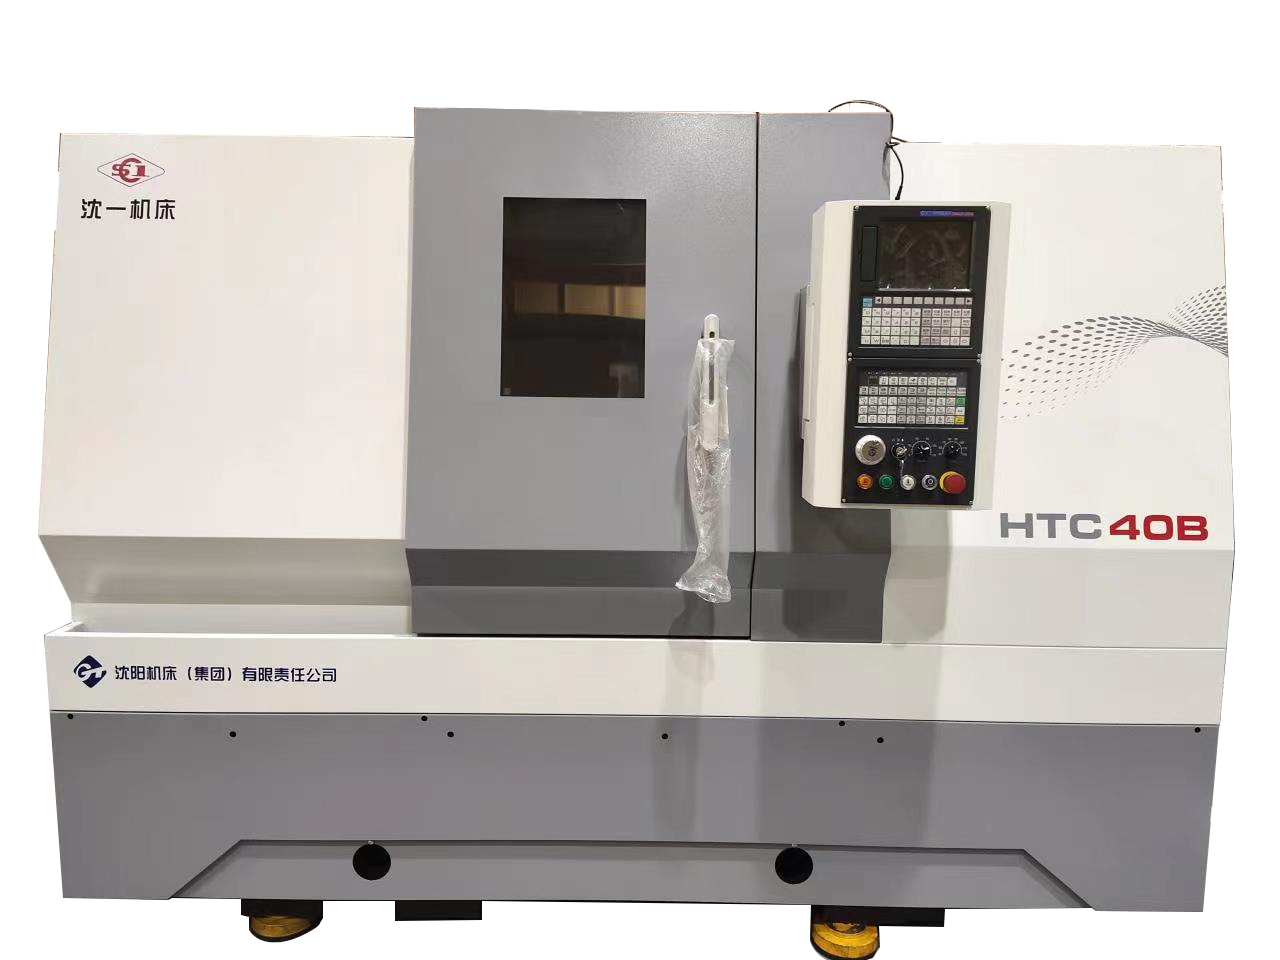 Do you know what preparatory work needs to be done before setting up a CNC slant-bed machine?